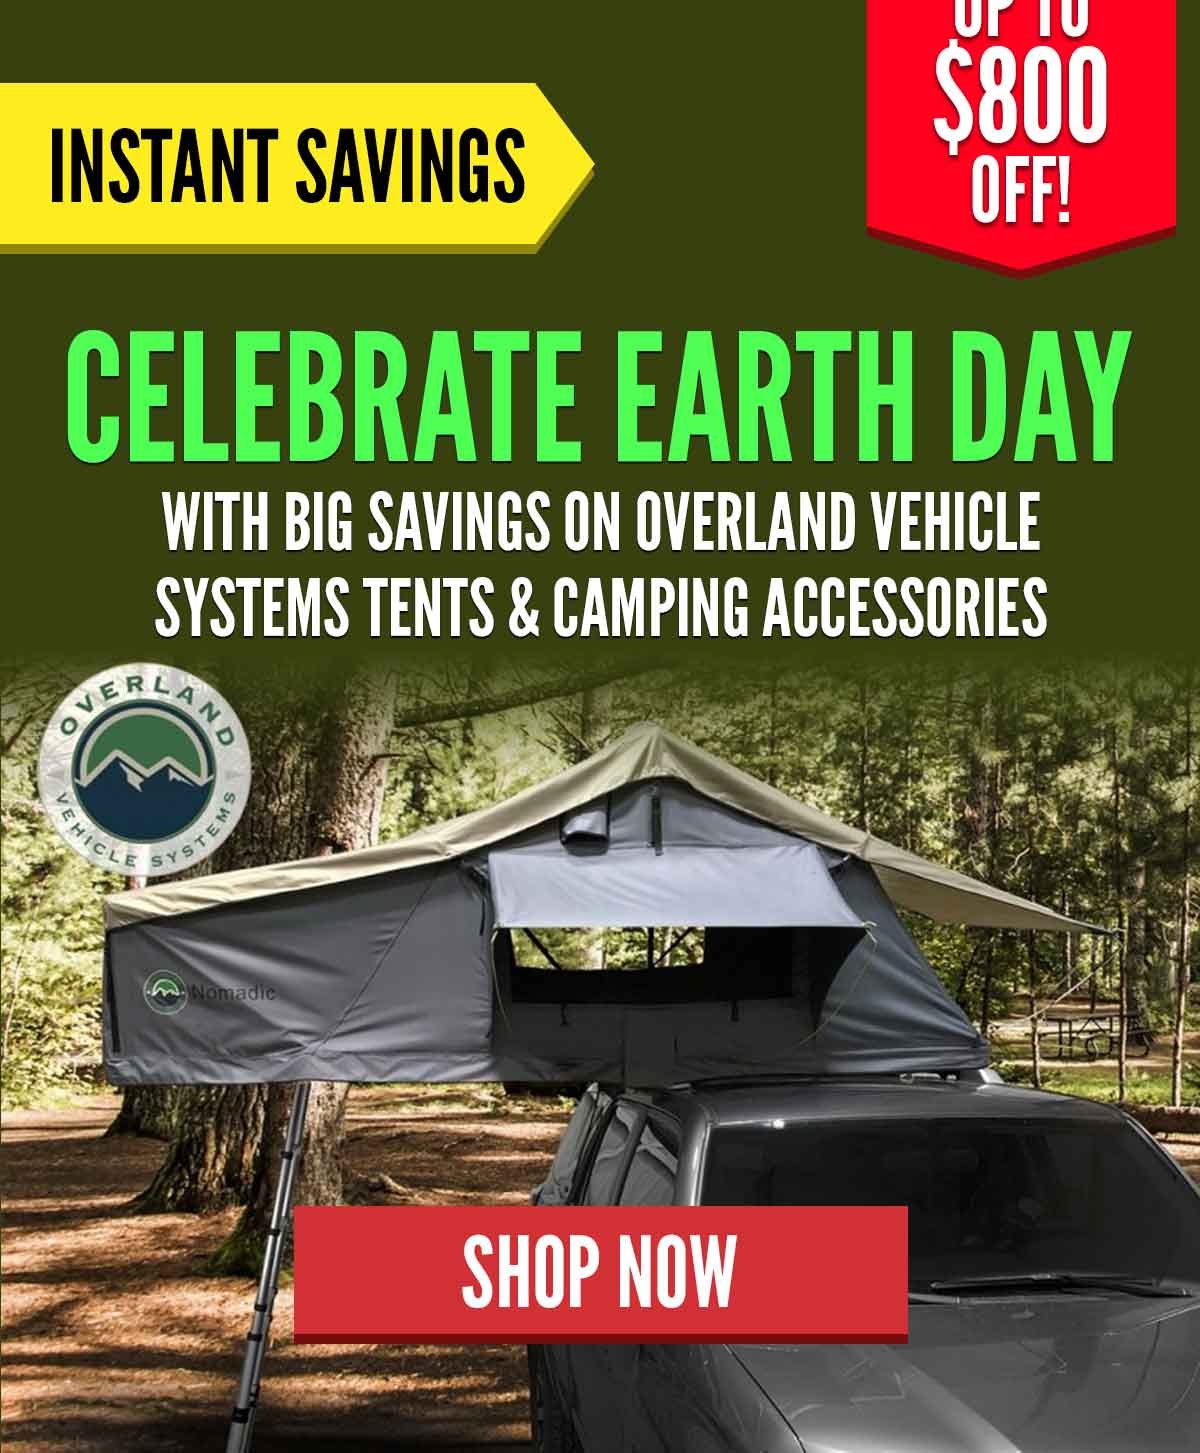 Celebrate Earth Day With Big Savings On Overland Vehicle Systems Tents & Camping Accessories